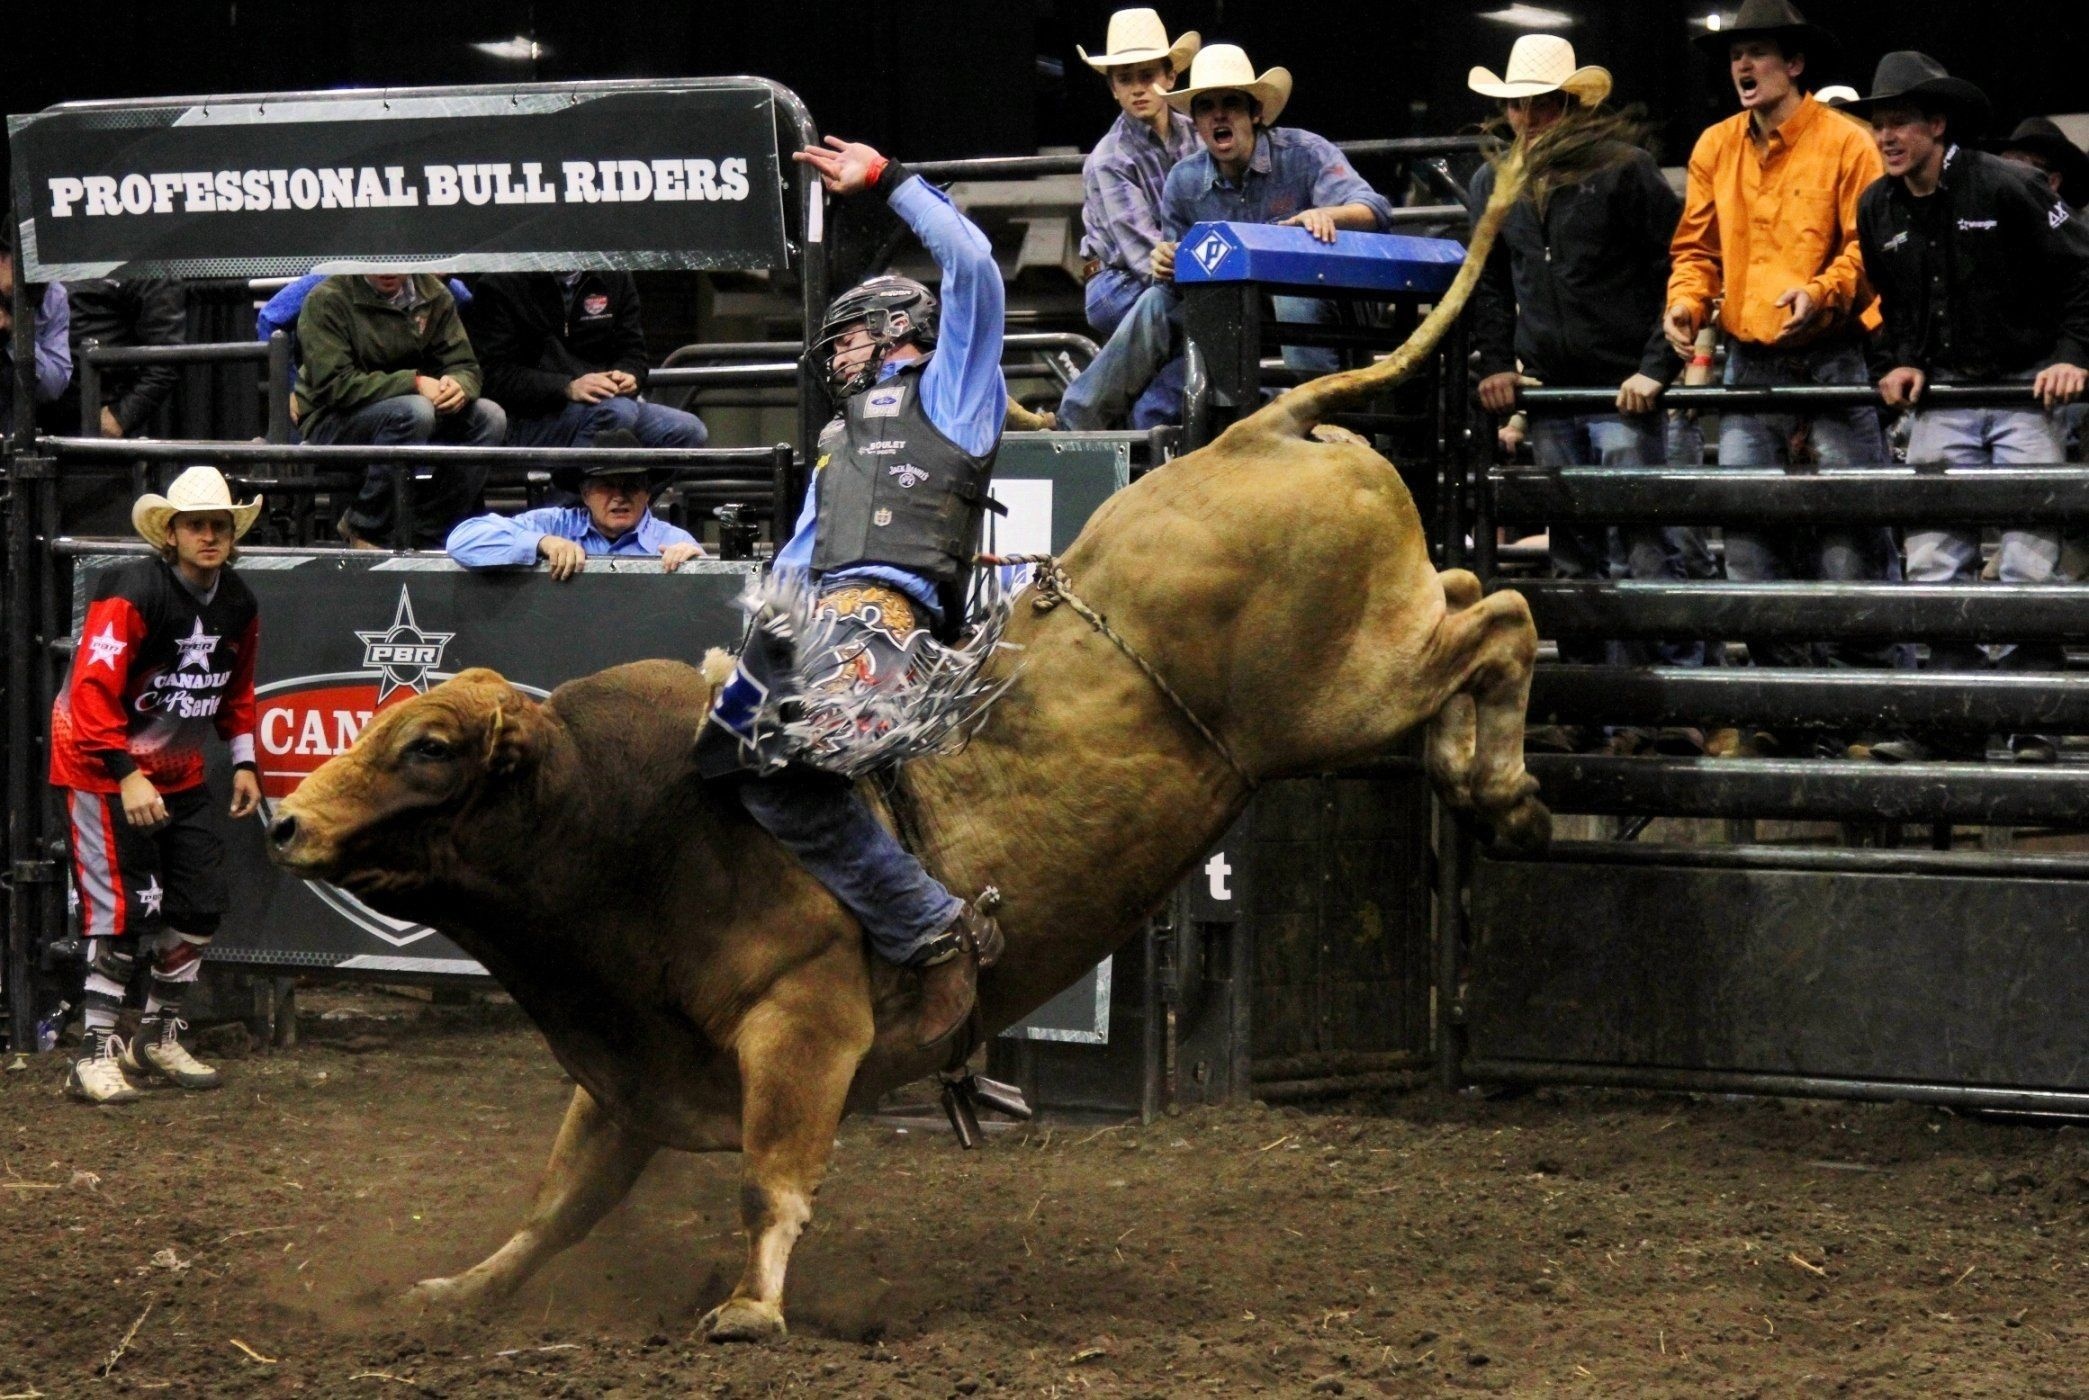 Bullriding: Rodeo, A bull tries to buck off the rider, Extreme and deathful sport, Horns. 2090x1400 HD Background.